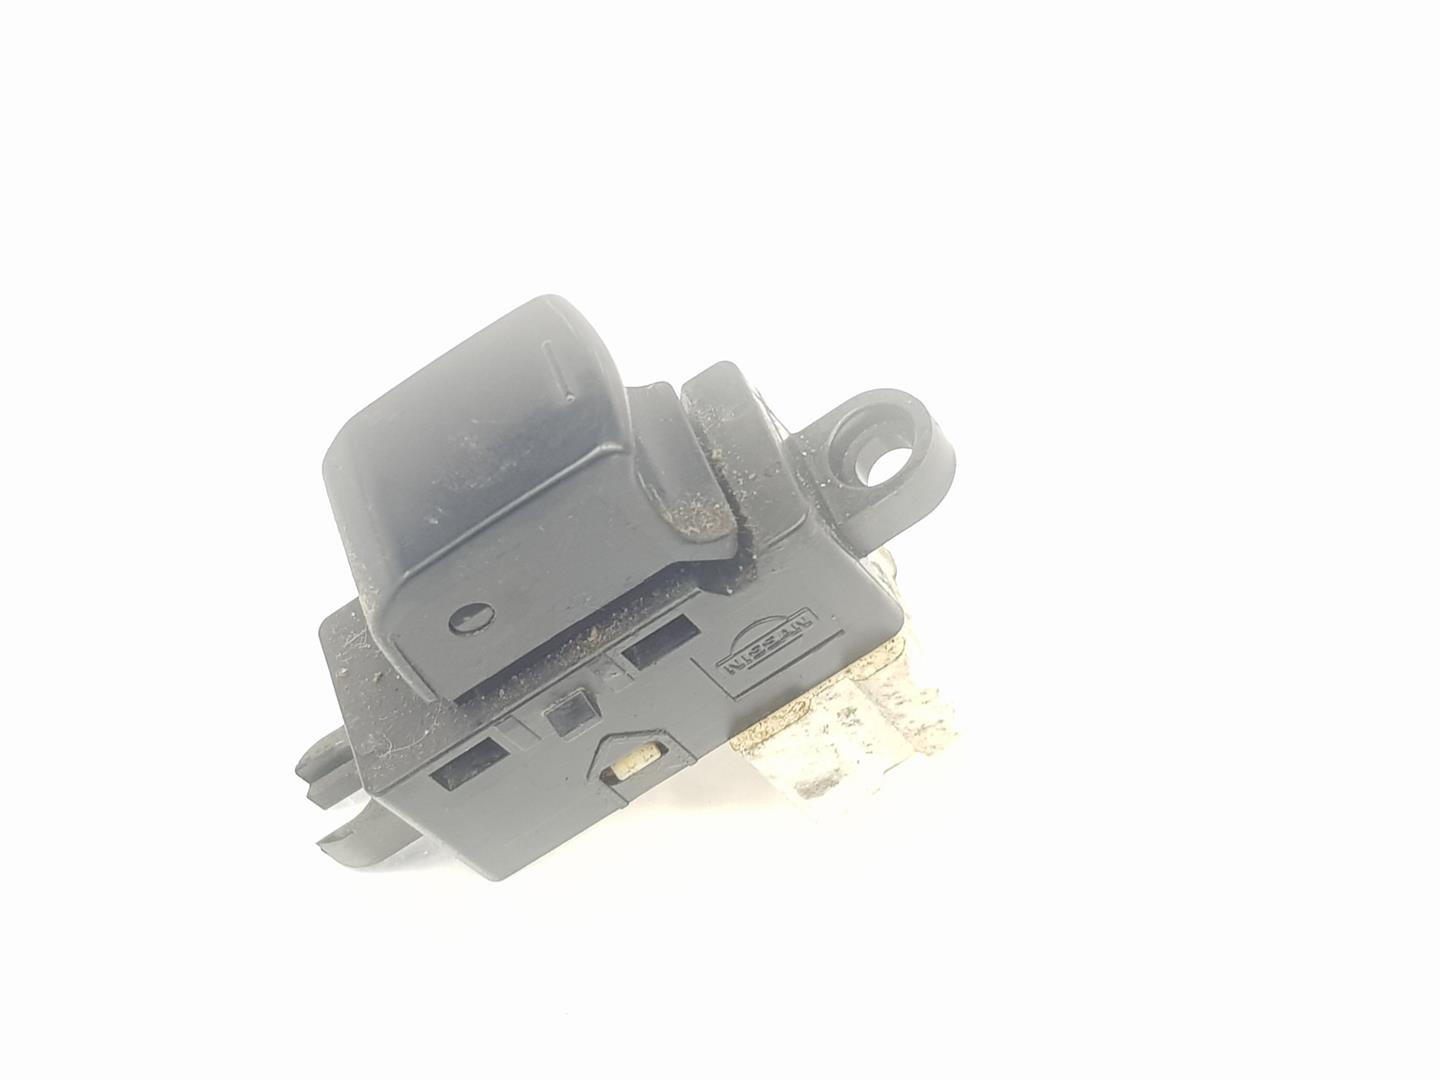 SUBARU Forester SH (2007-2013) Front Right Door Window Switch 83071FG110, 83071FG110 24228865